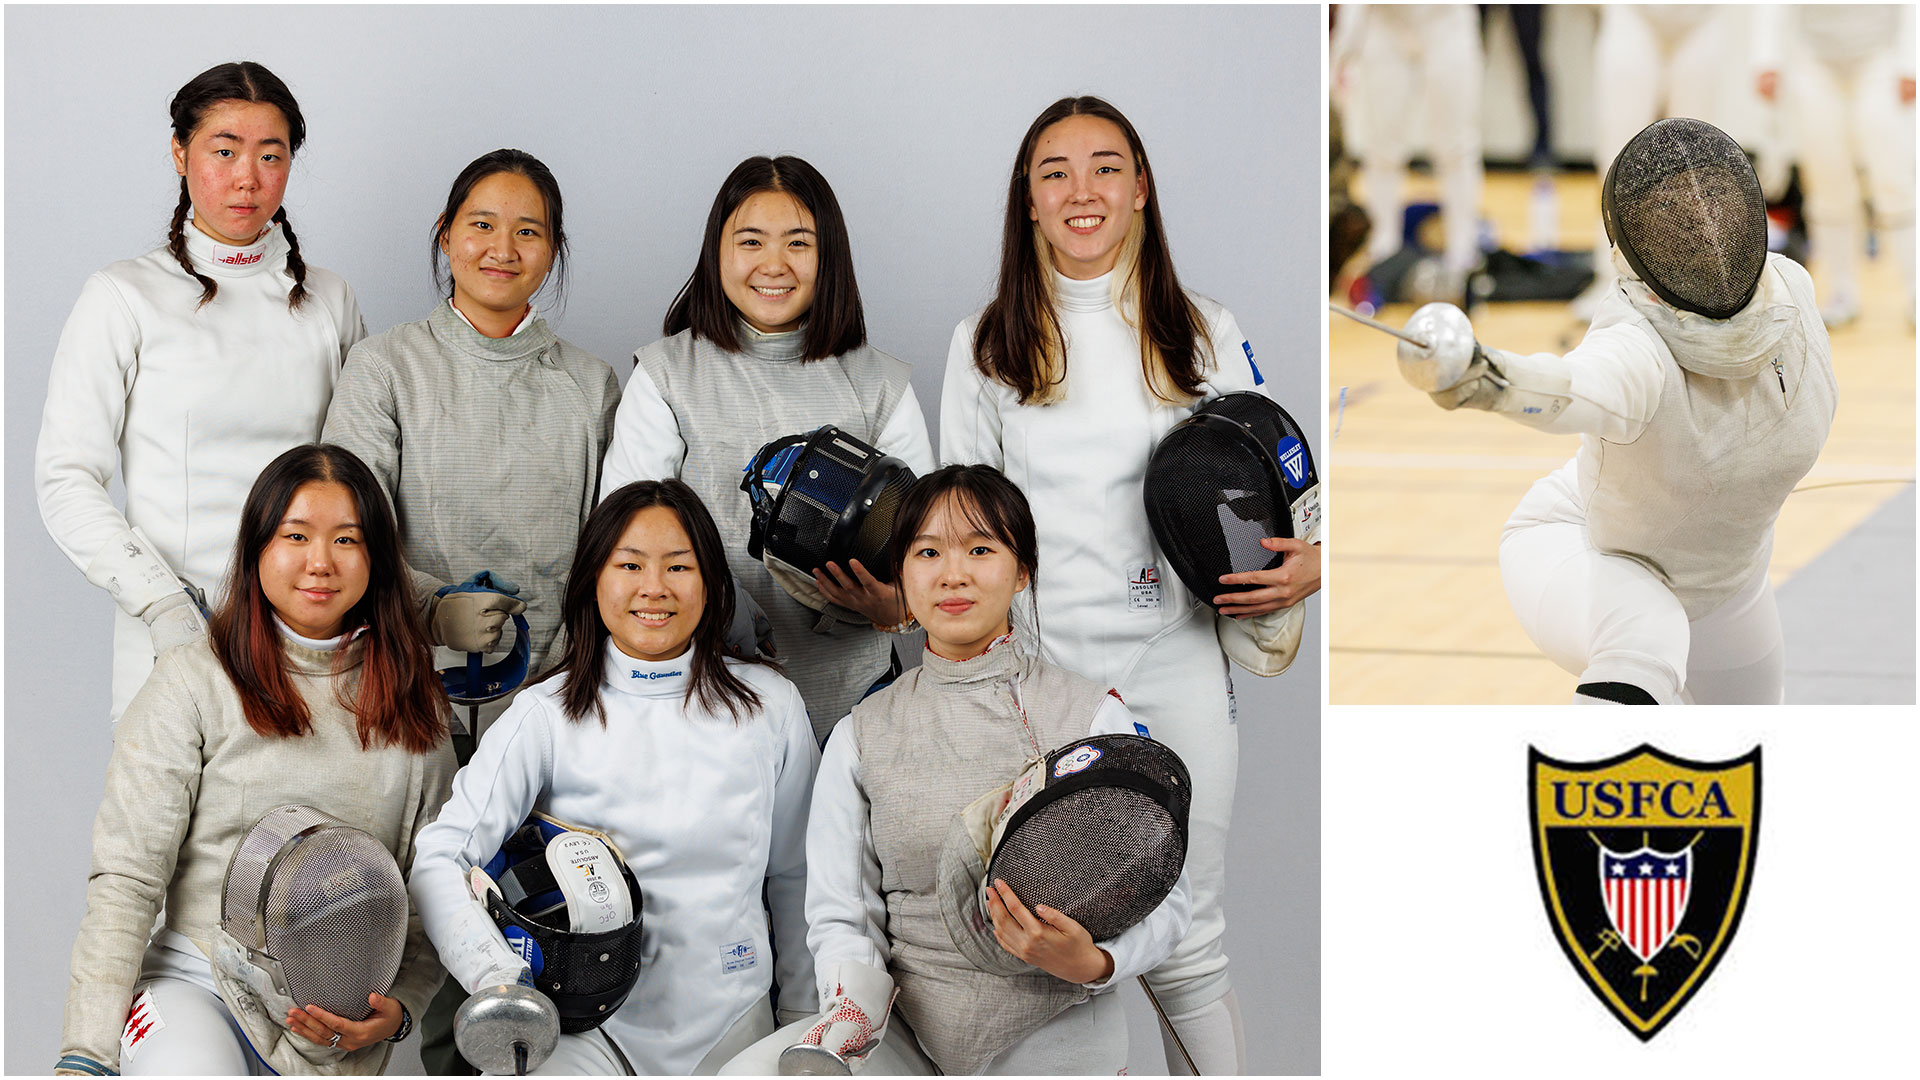 Wellesley fencing was voted No. 4 in the USFCA Preseason Coaches' Poll (Frank Poulin)